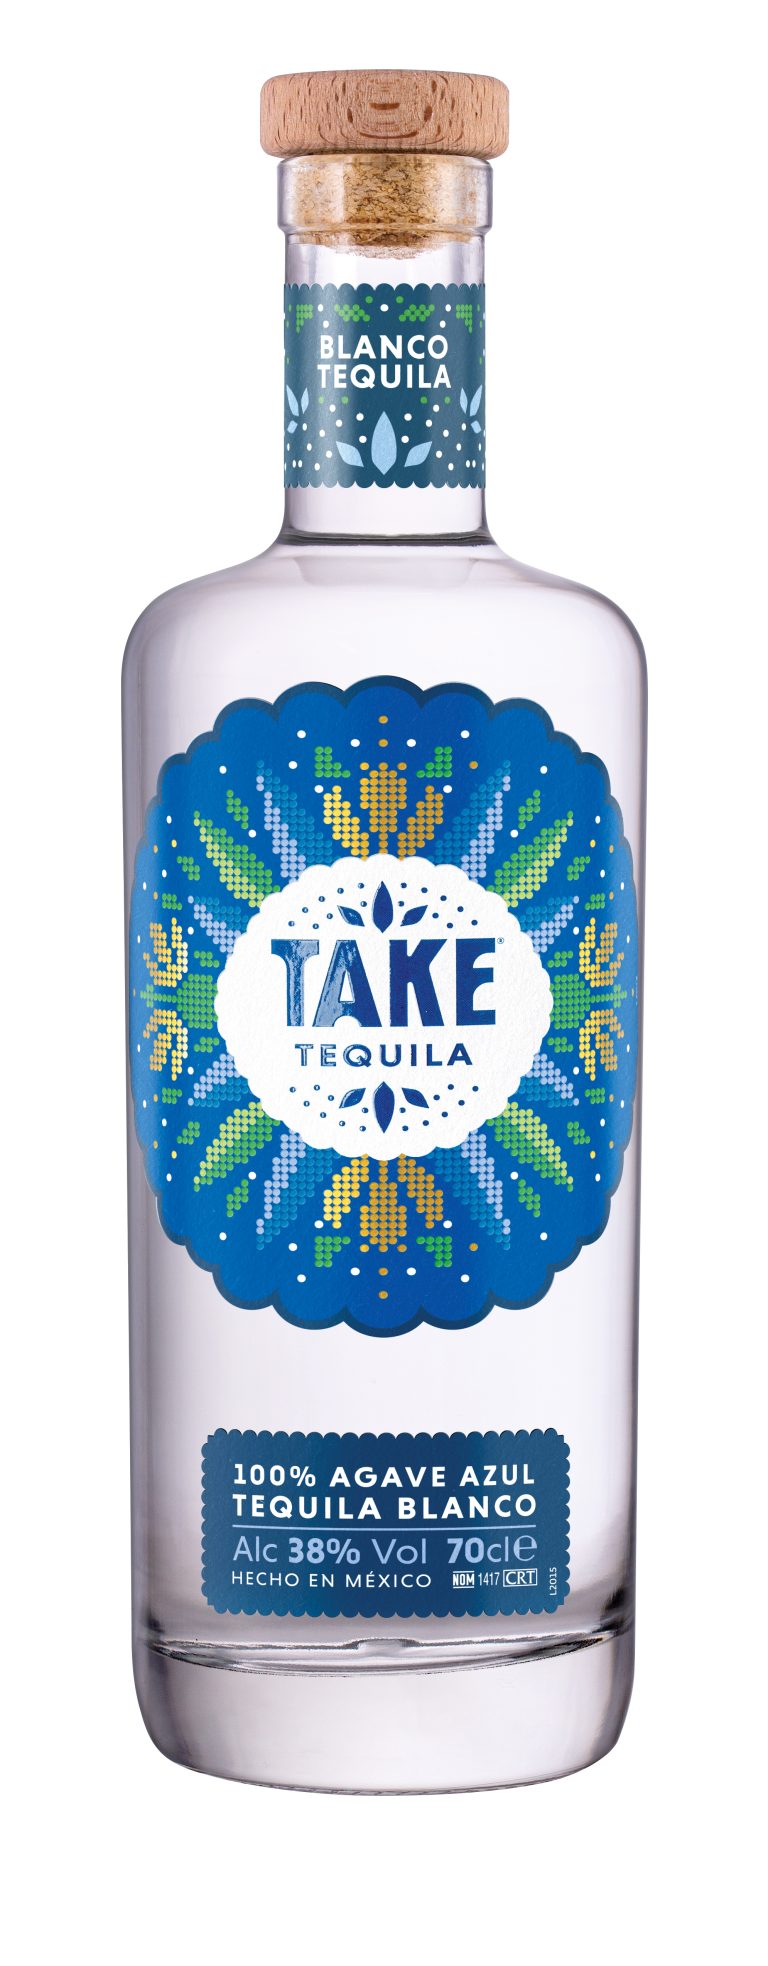 Global Brands enters new category with a fresh TAKE on tequila 